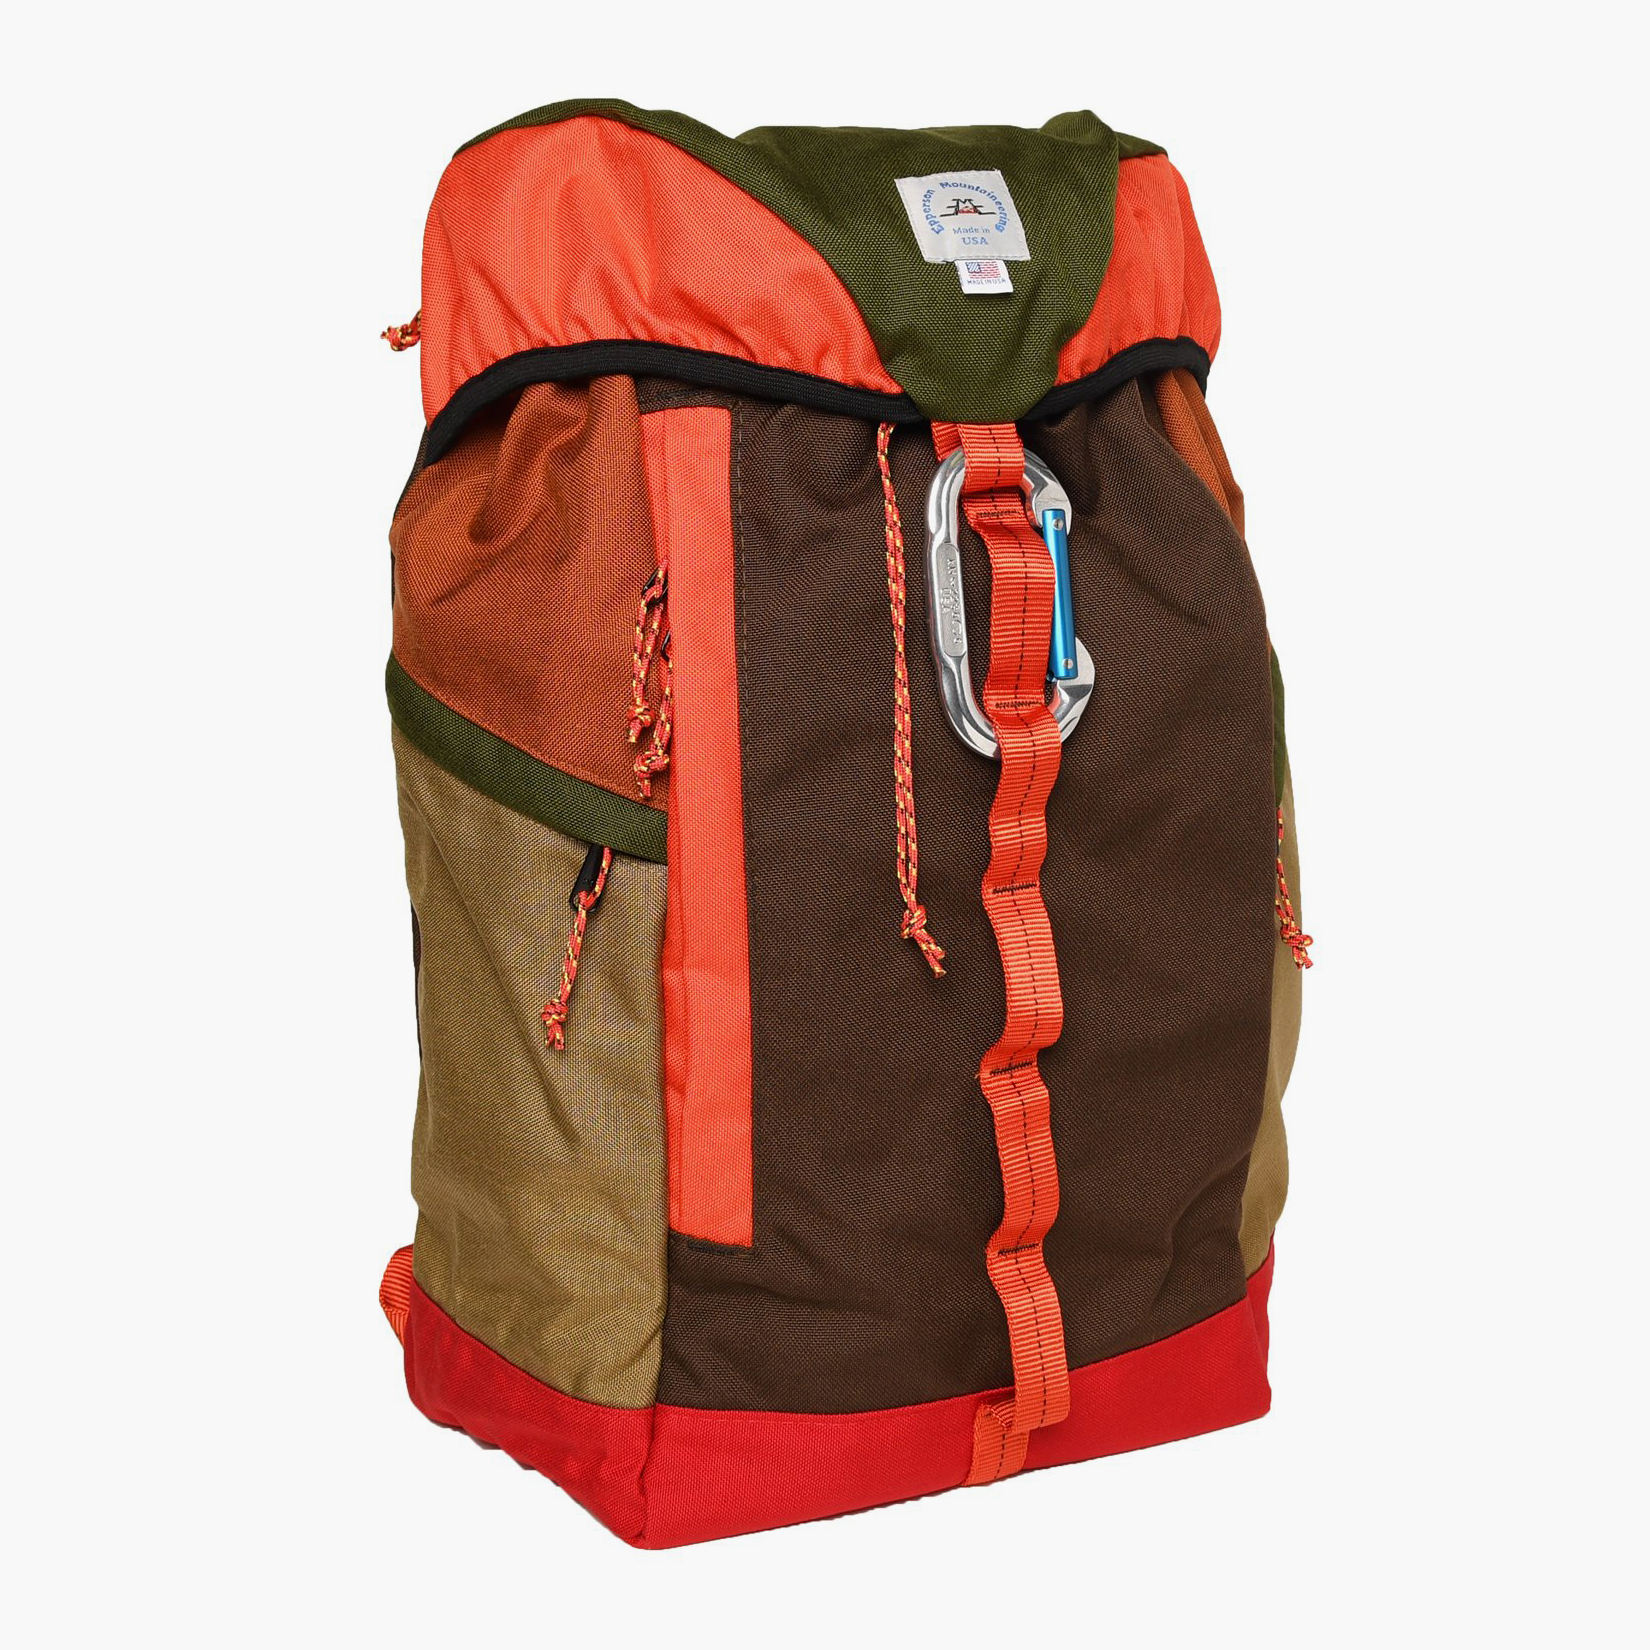 Epperson Mountaineering Large Multicolored Climb Backpack - Moss Green / Coffee